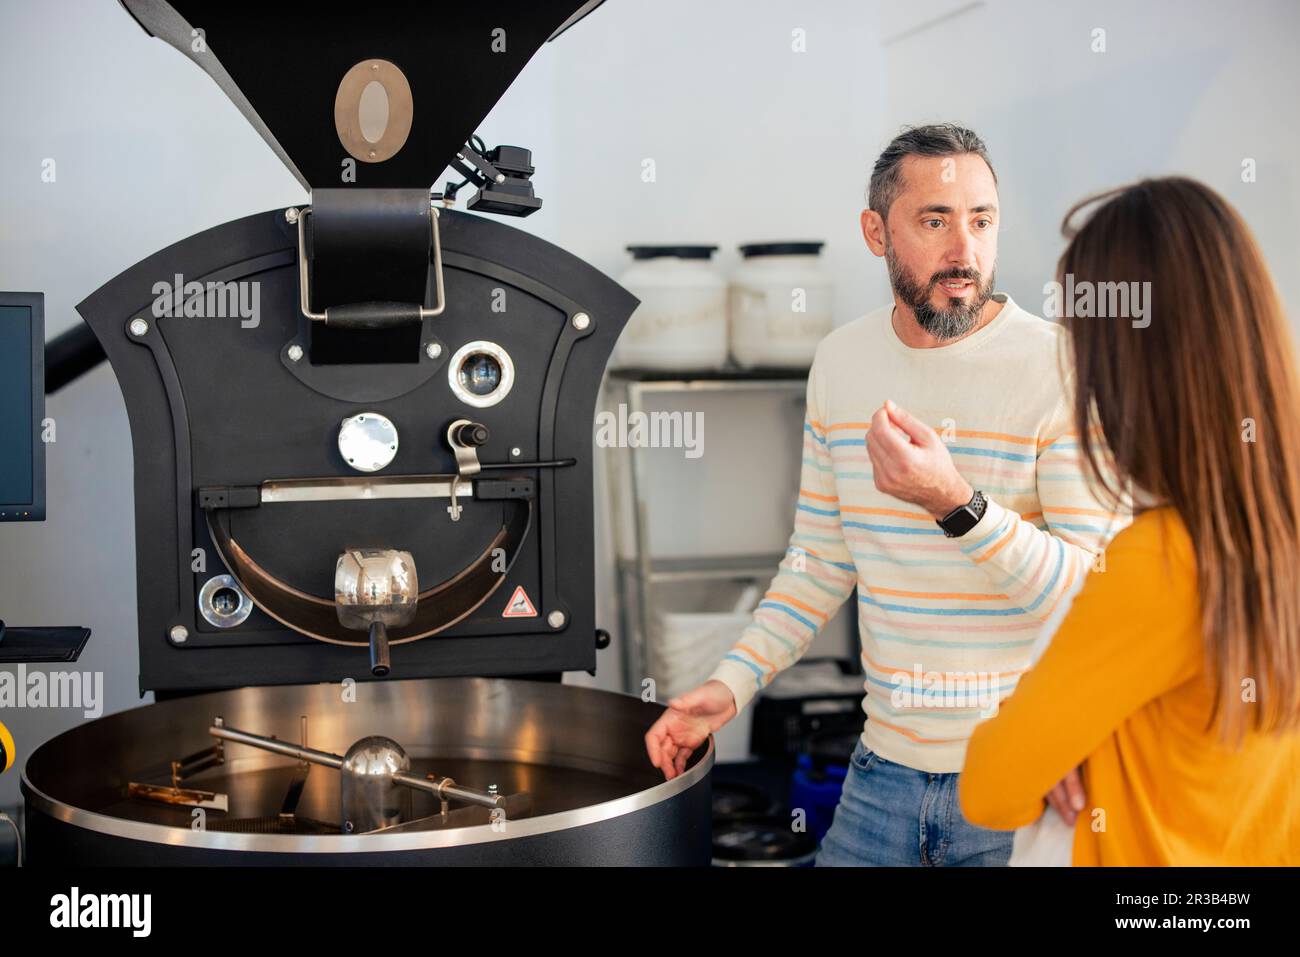 Man explaining woman standing near coffee grinder at cafe Stock Photo